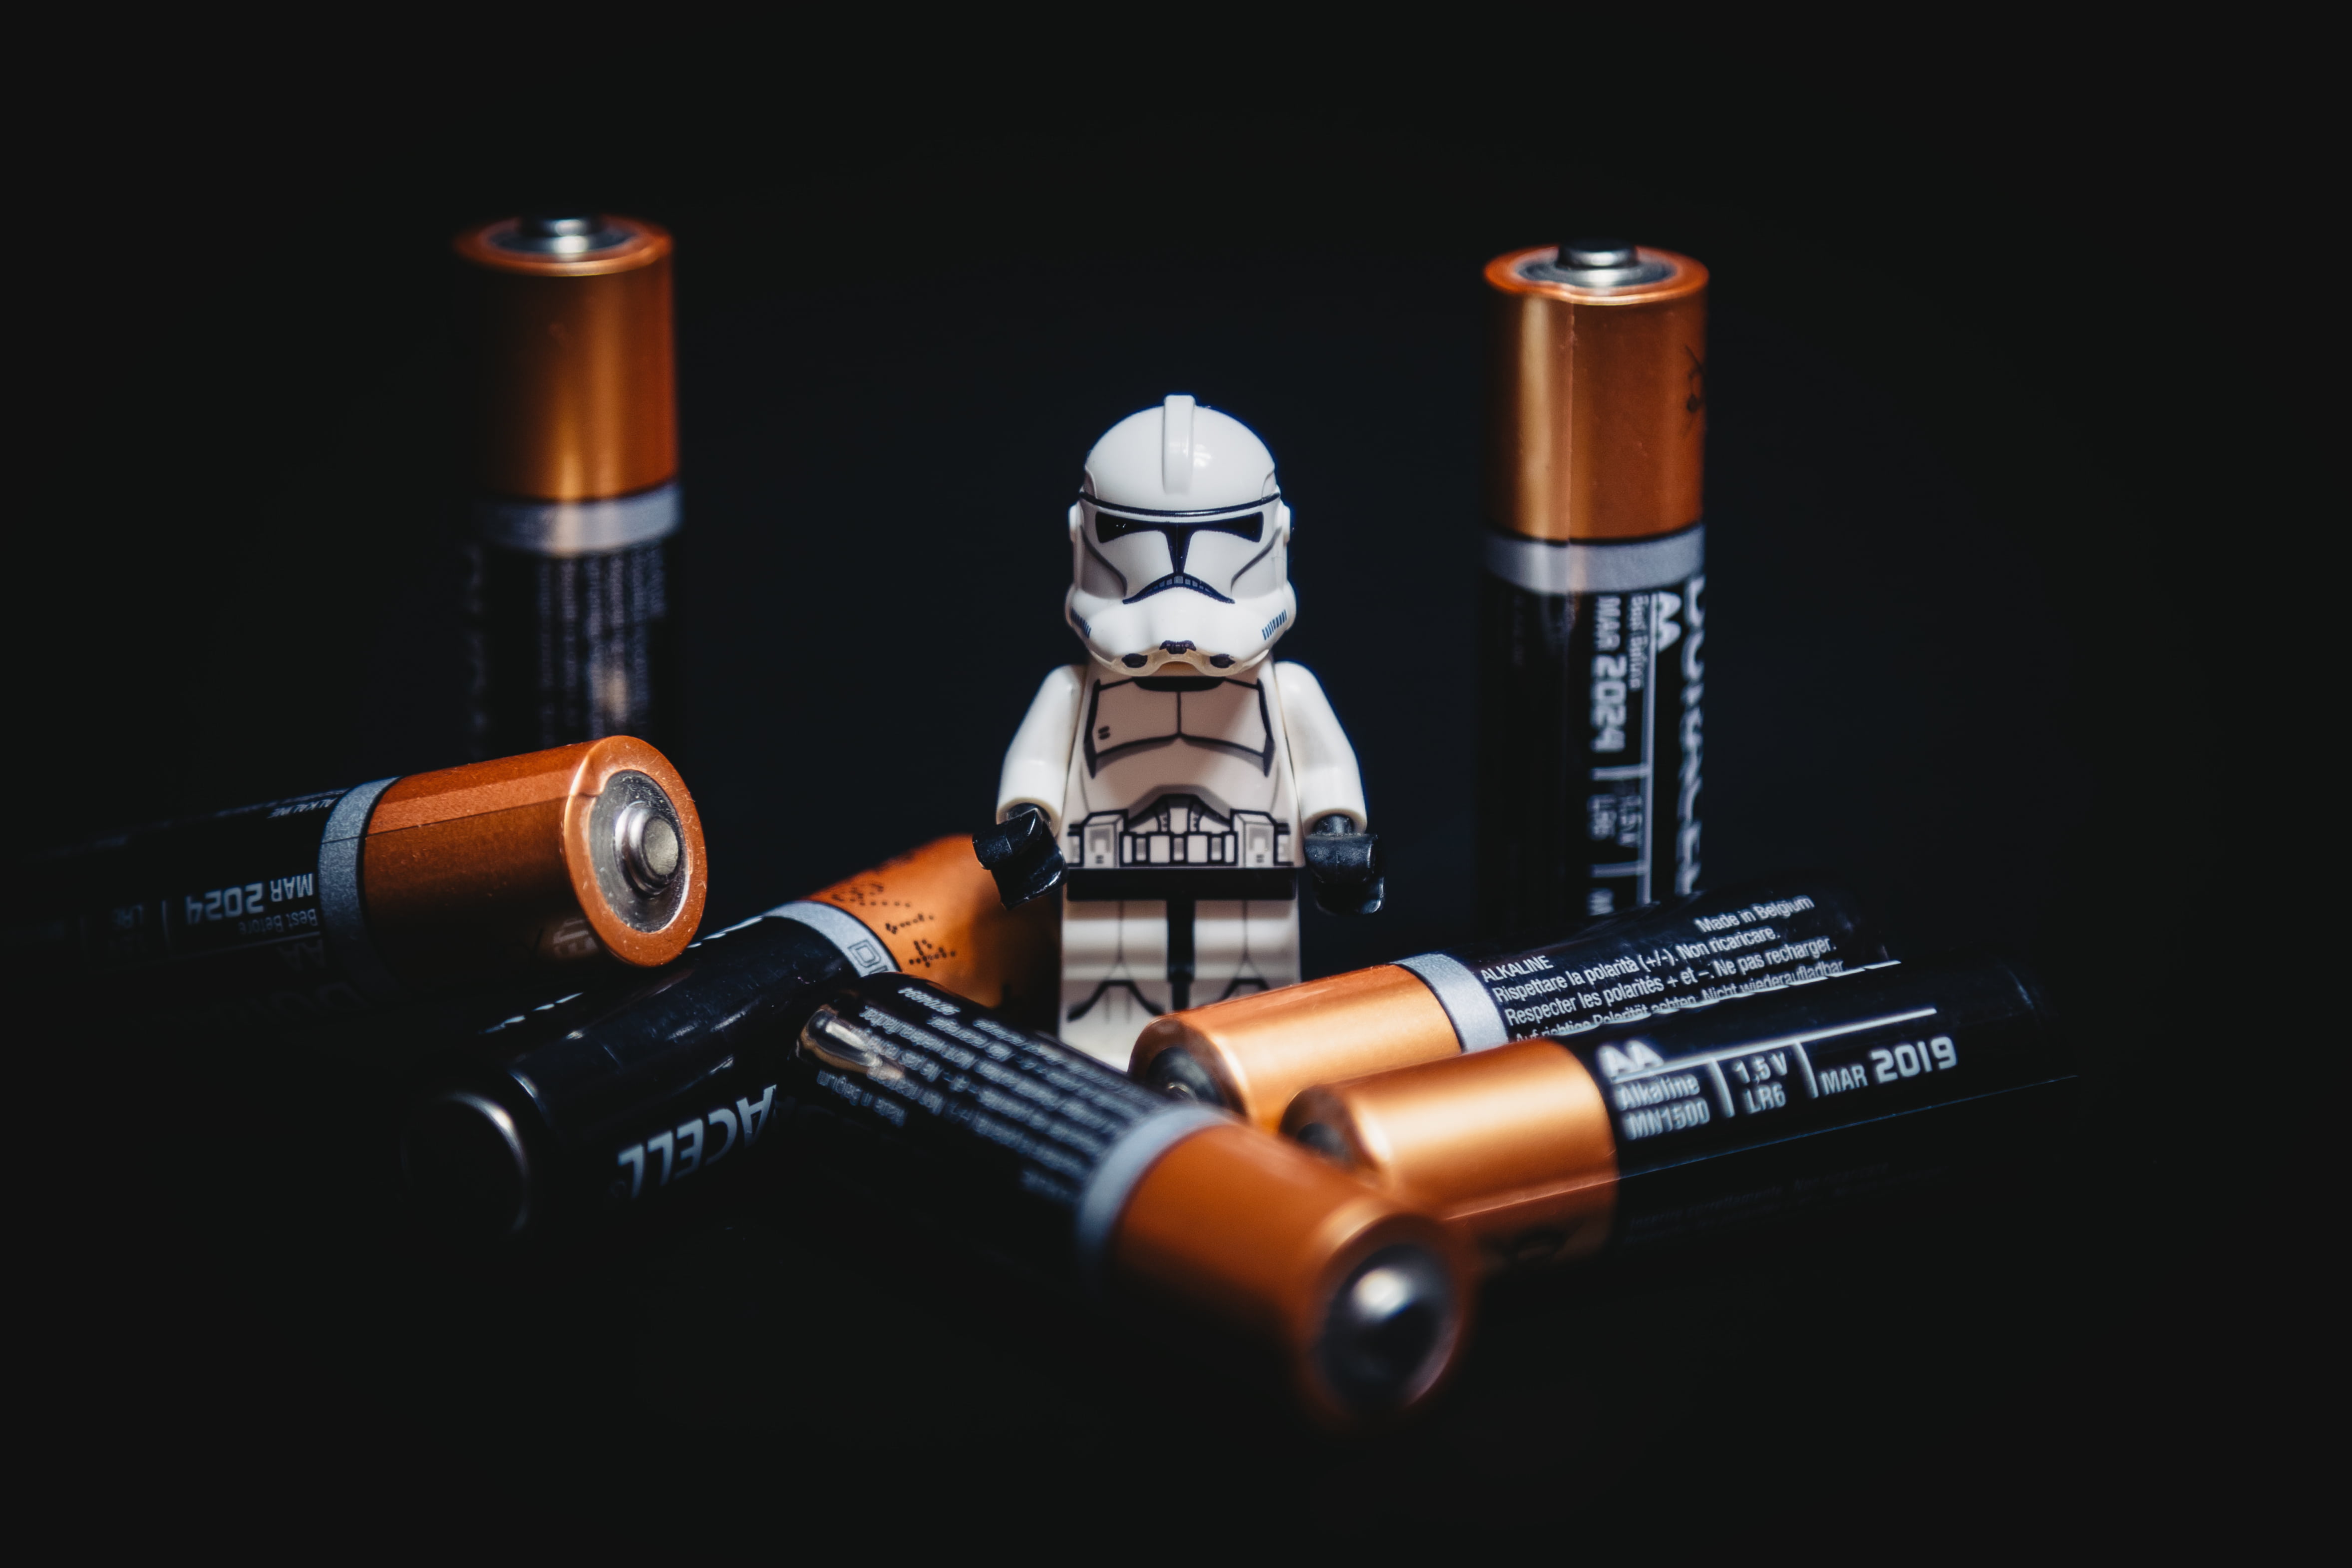 Star Wars Lego minifigure surrounded by batteries, shallow, focus